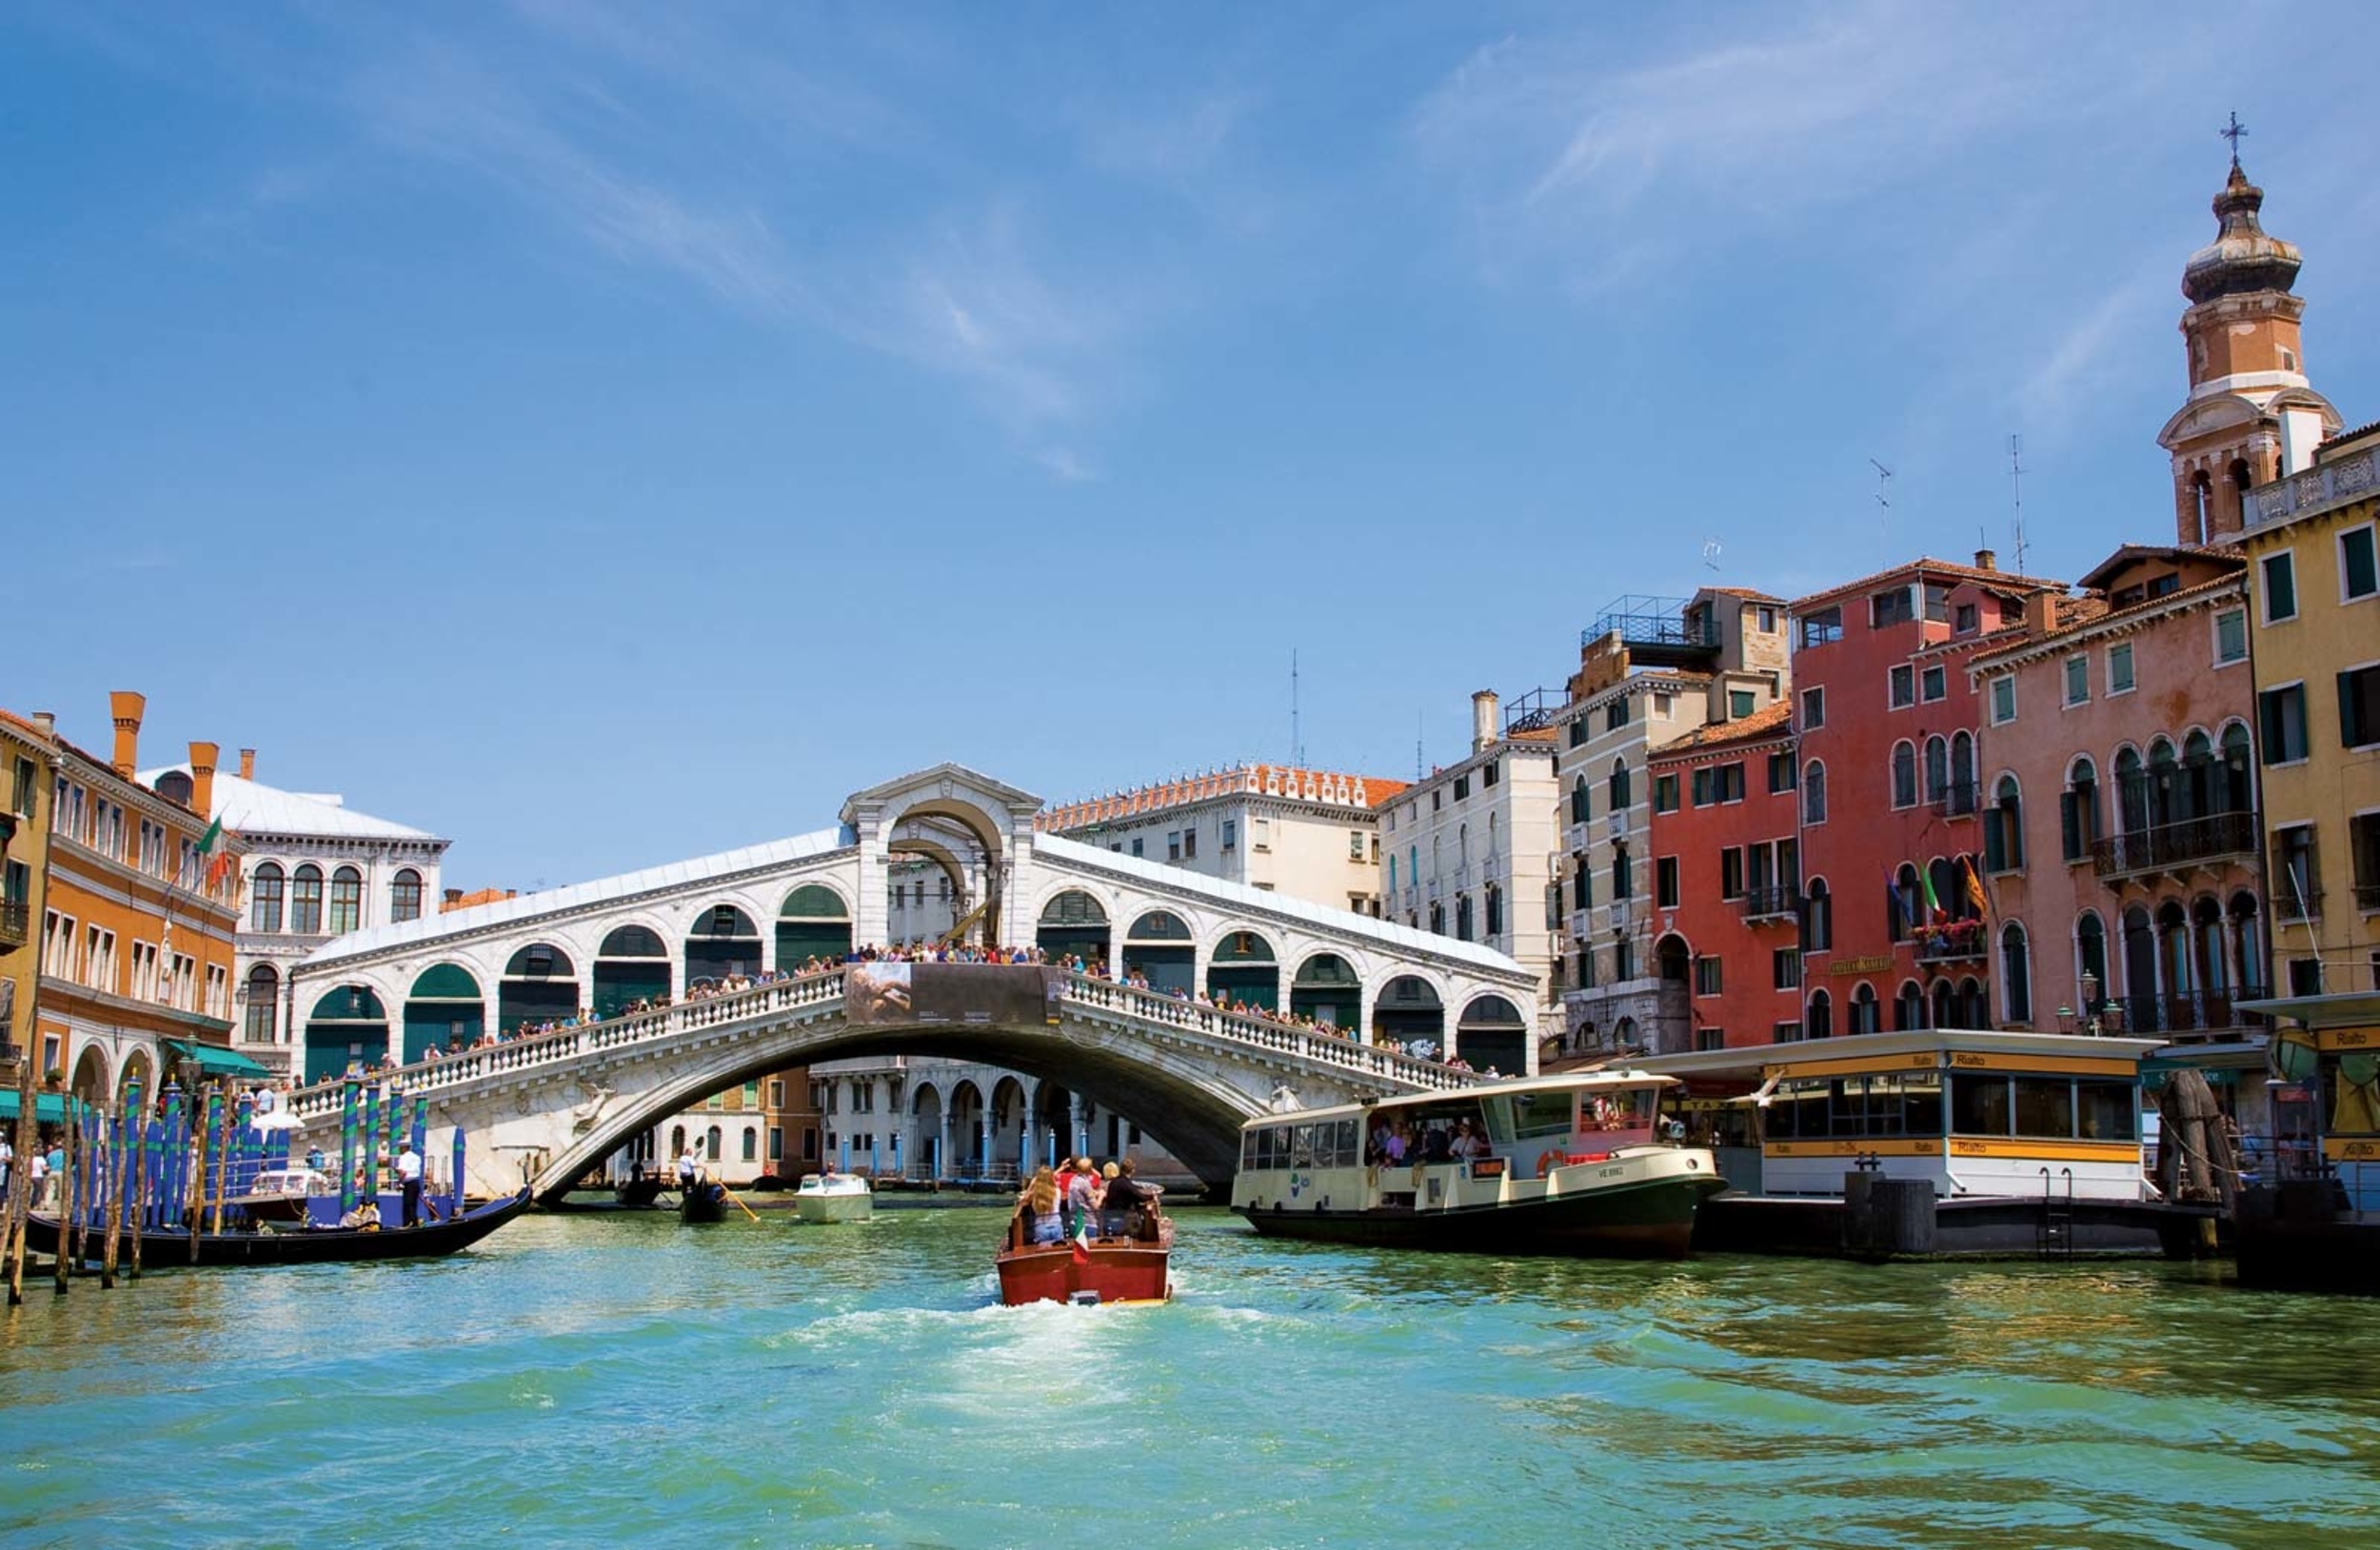 <p>Another candidate for best-selfie: Rialto Bridge has the best view of the Grand Canal, though best not to go midday. Like every main attraction in Venice, make plans to go in the morning or at night. </p><p>You may also like: <a href='https://www.yardbarker.com/lifestyle/articles/12_high_fat_foods_you_should_avoid_and_12_you_should_eat_regularly_022624/s1__39147466'>12 high-fat foods you should avoid and 12 you should eat regularly</a></p>